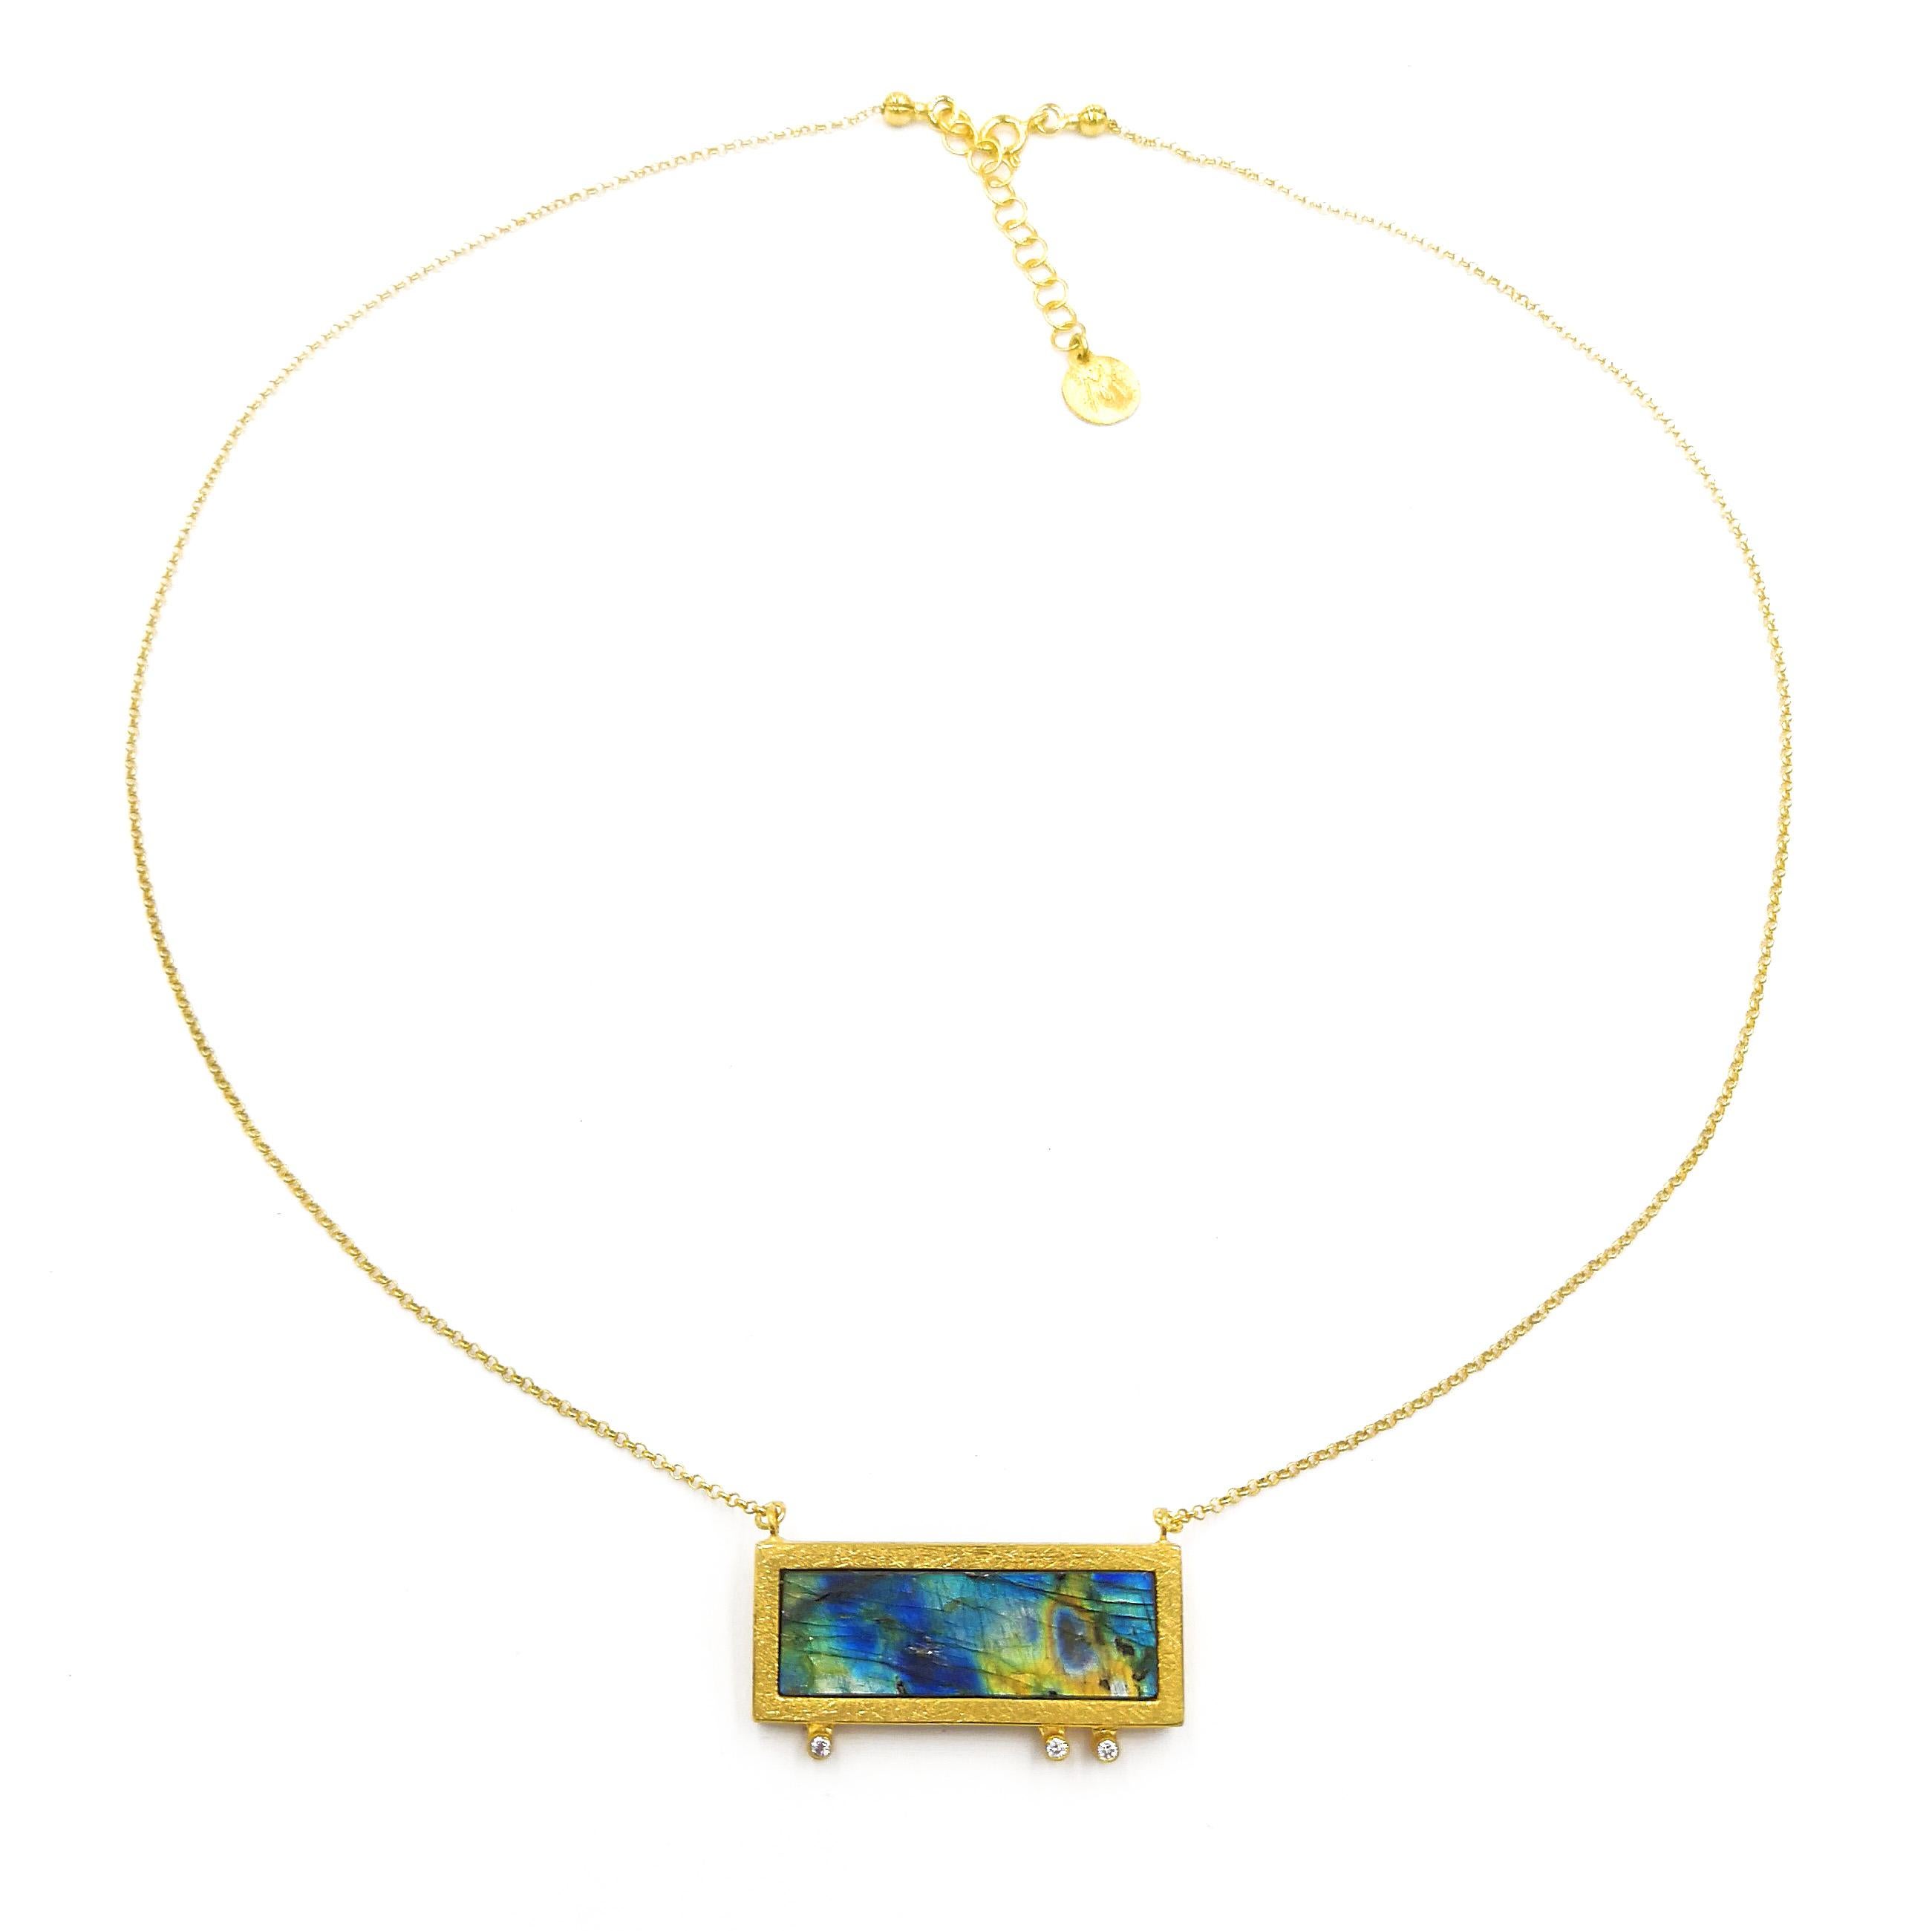 Labradorite Zircon Silver Gold Plade Hand Made Artist Chain Pendant Necklace
Magic Labradorite shows its beauty in one setting. But when it shines, it reveals an amazing beauty, a whole palette of colors. Rectangular stone decorated with a simple